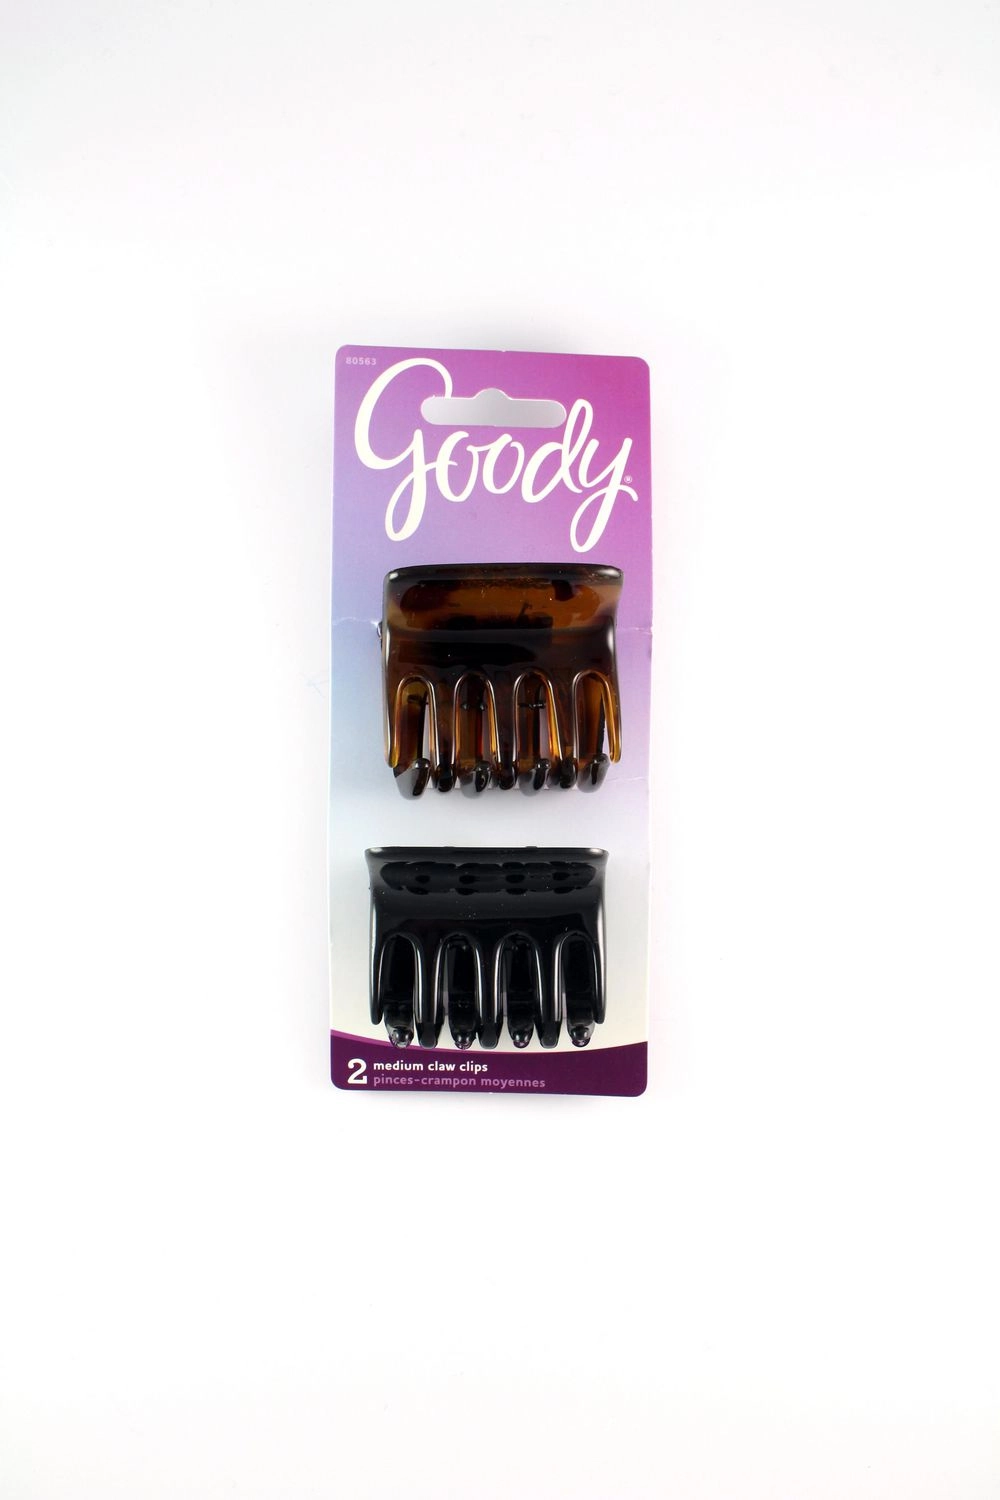 Goody Classics Square Comfort Claw Clips